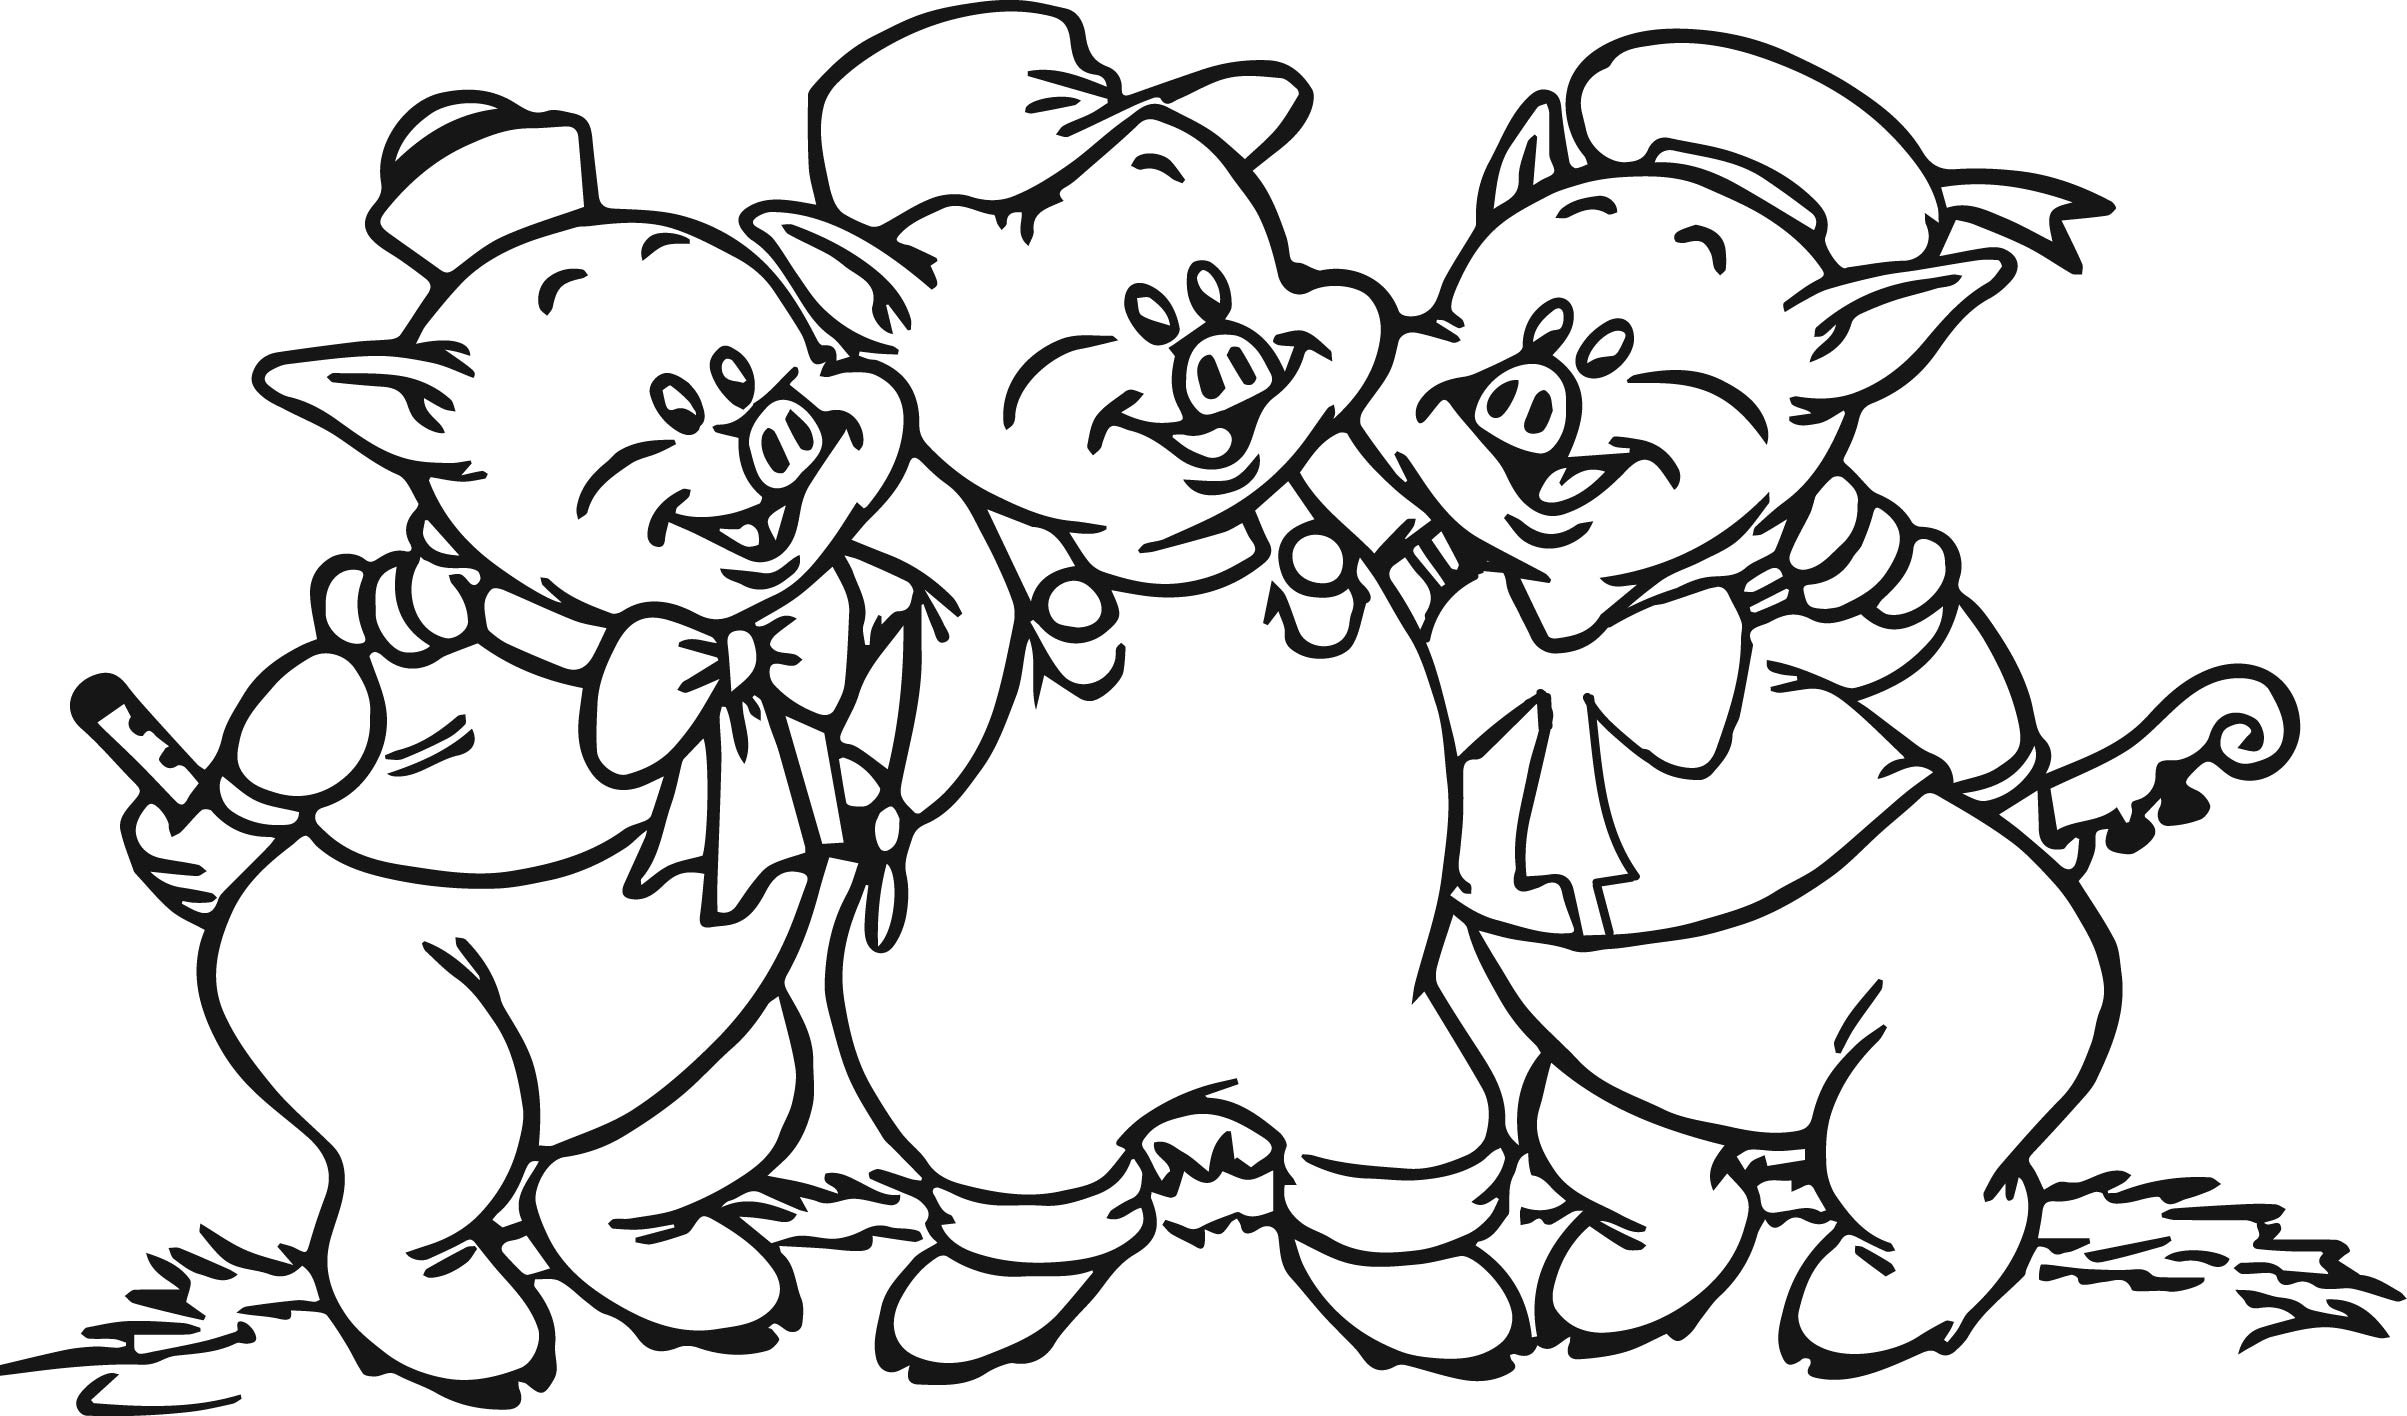 three-little-pigs-coloring-page-worksheets-99worksheets